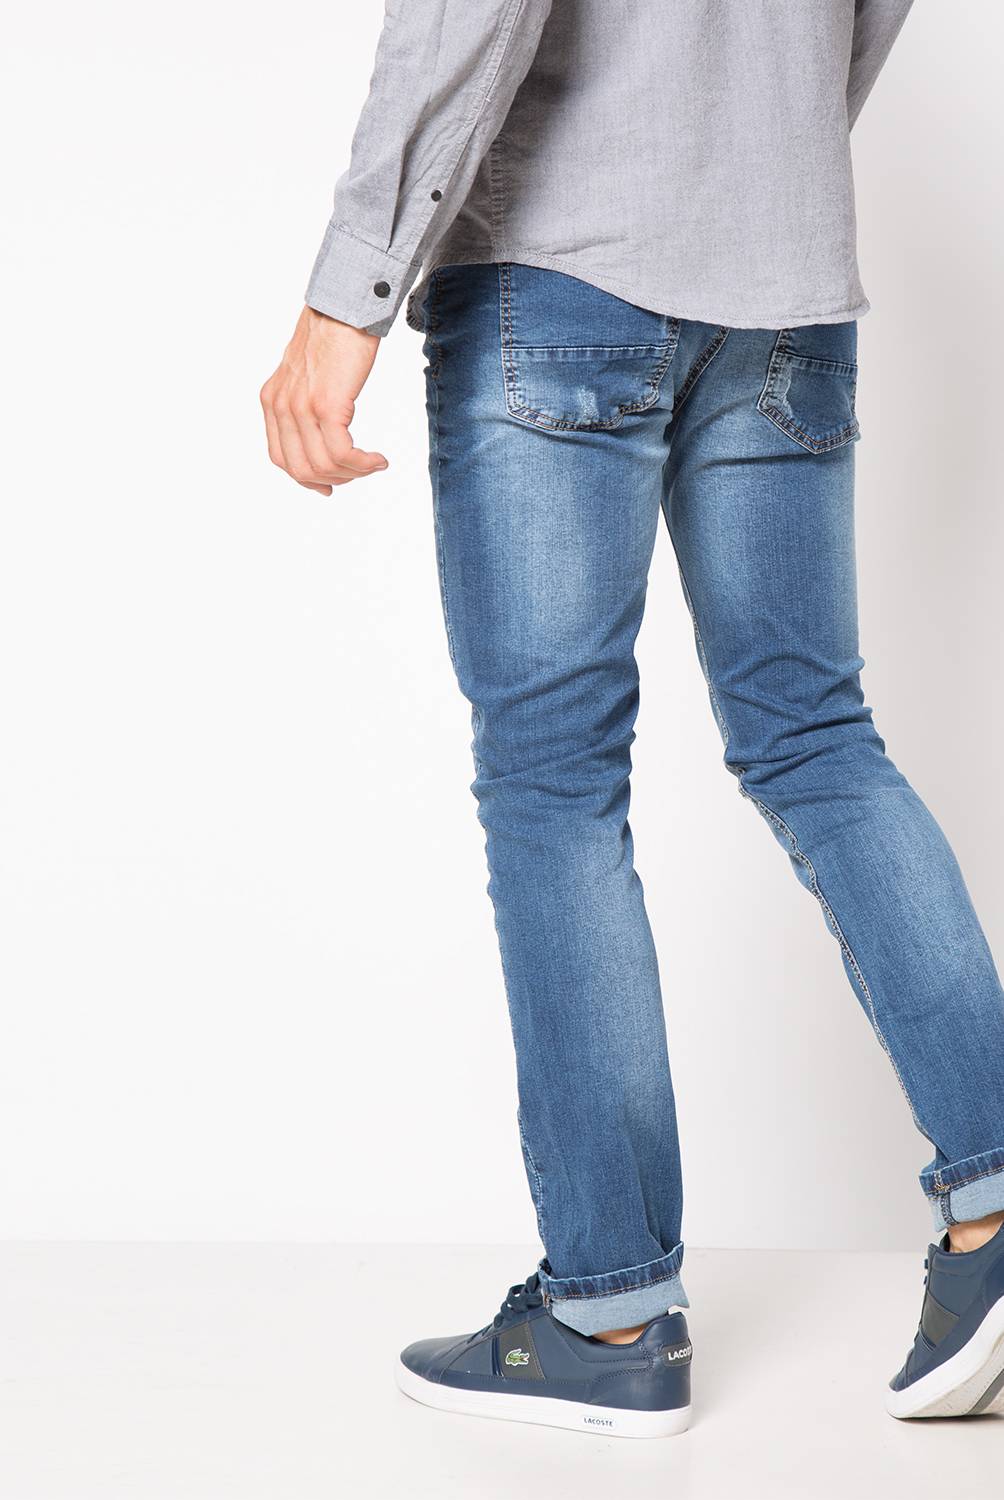 Mossimo - Jeans Casual Slim Fit